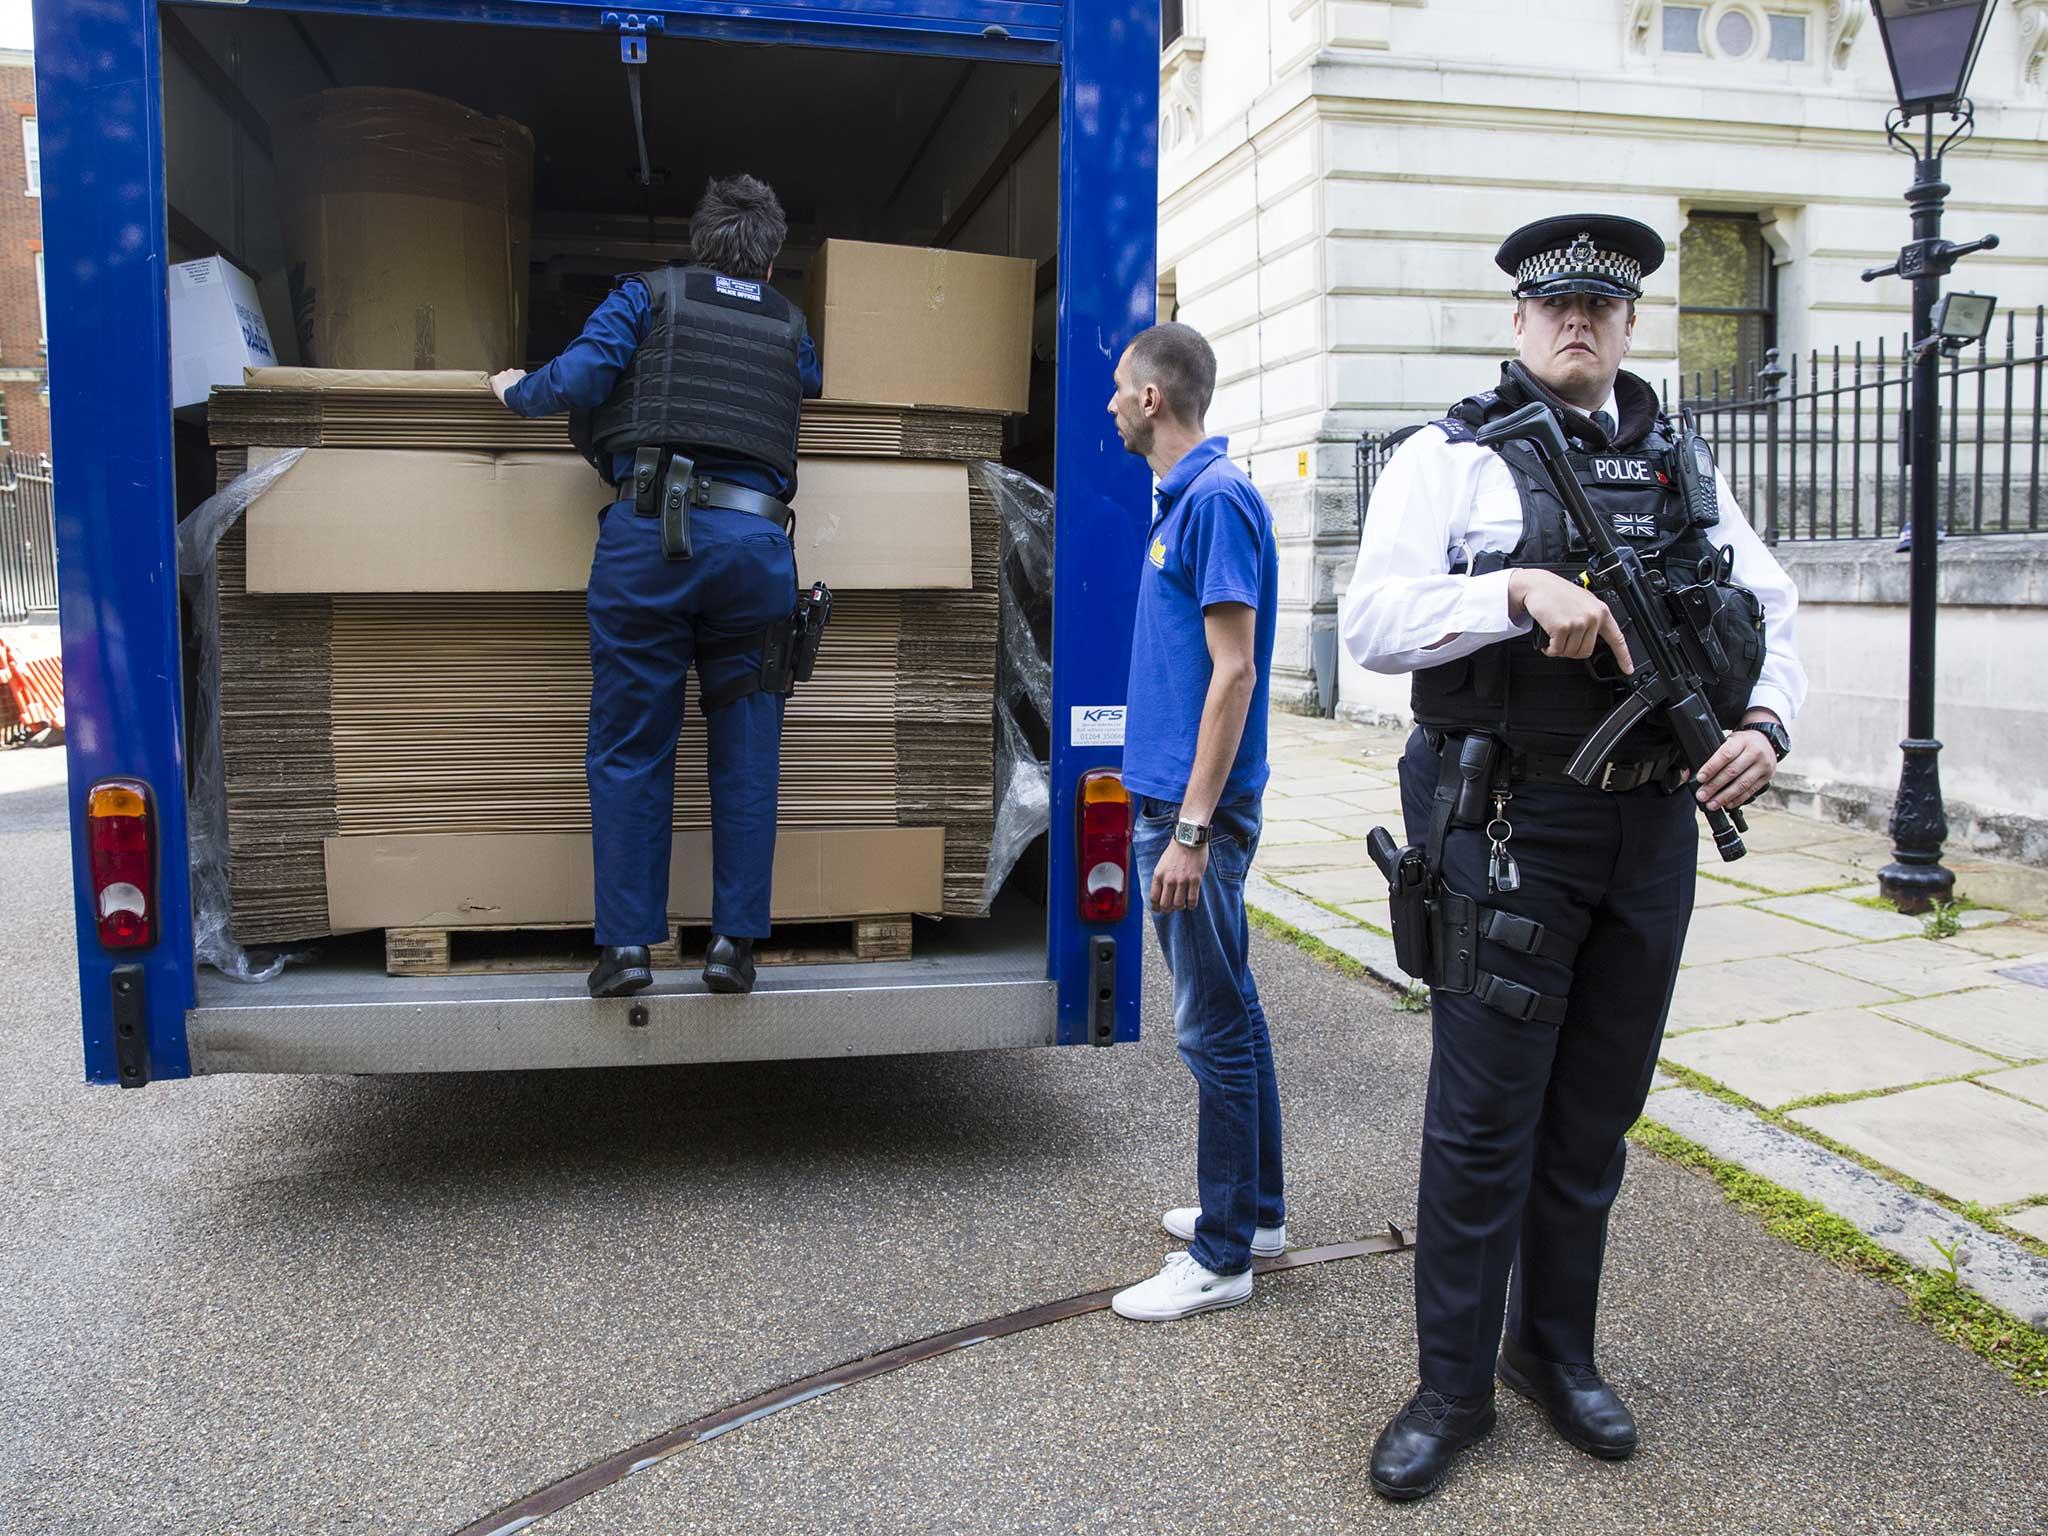 A removal van loaded with cardboard boxes is inspected by police before entering Downing Street